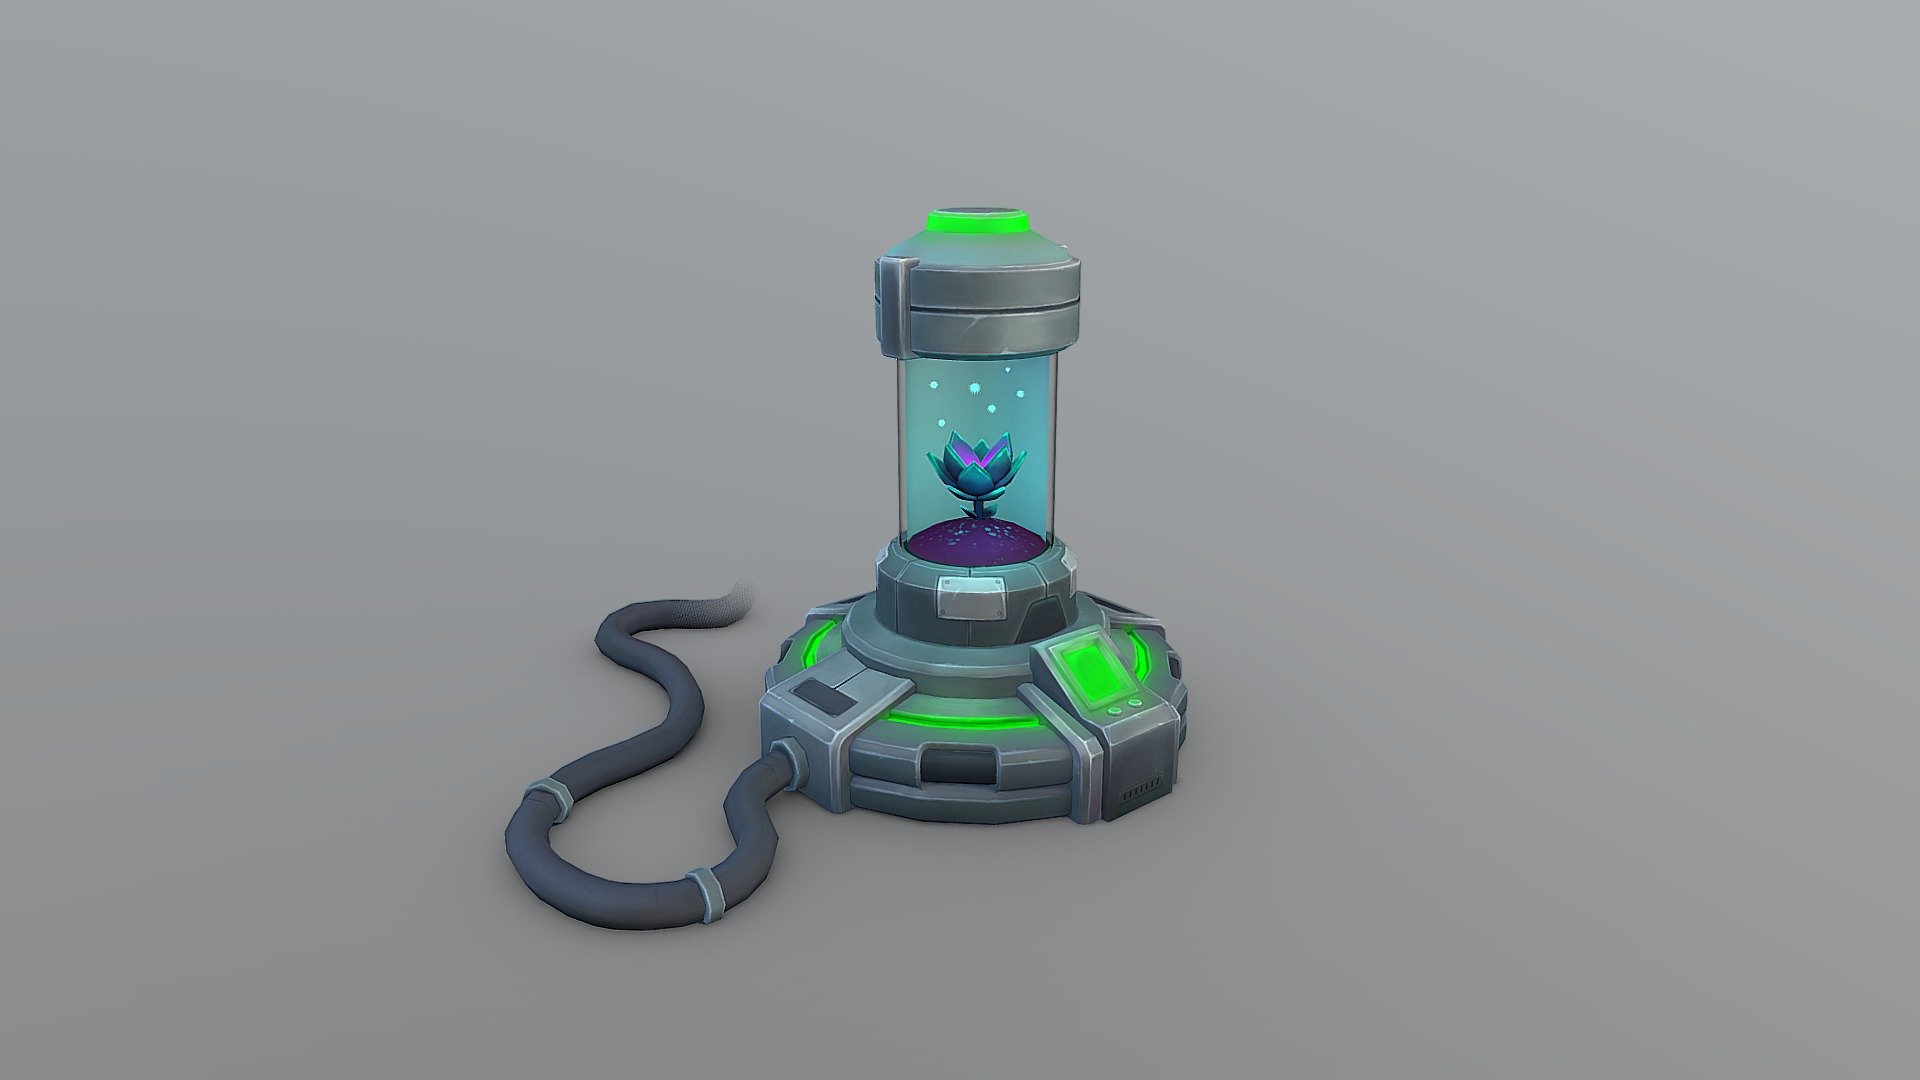 This is a Sci-Fi prop that I designed for Ashleigh Warner's CGMA Course.
https://www.cgmasteracademy.com/courses/143-creating-stylized-game-assets
Coming up with a concept for a Sci-Fi themed prop was outside my comfort zone. After exploring various ideas, I ended up with a Botanical Incubator that contains a flower with healing properties.

Check out more images on my artstation here: https://www.artstation.com/artwork/WKG902 - Botanical Incubator - 3D model by Leigh-Ann Johnson (@leigh-ann) 3d model